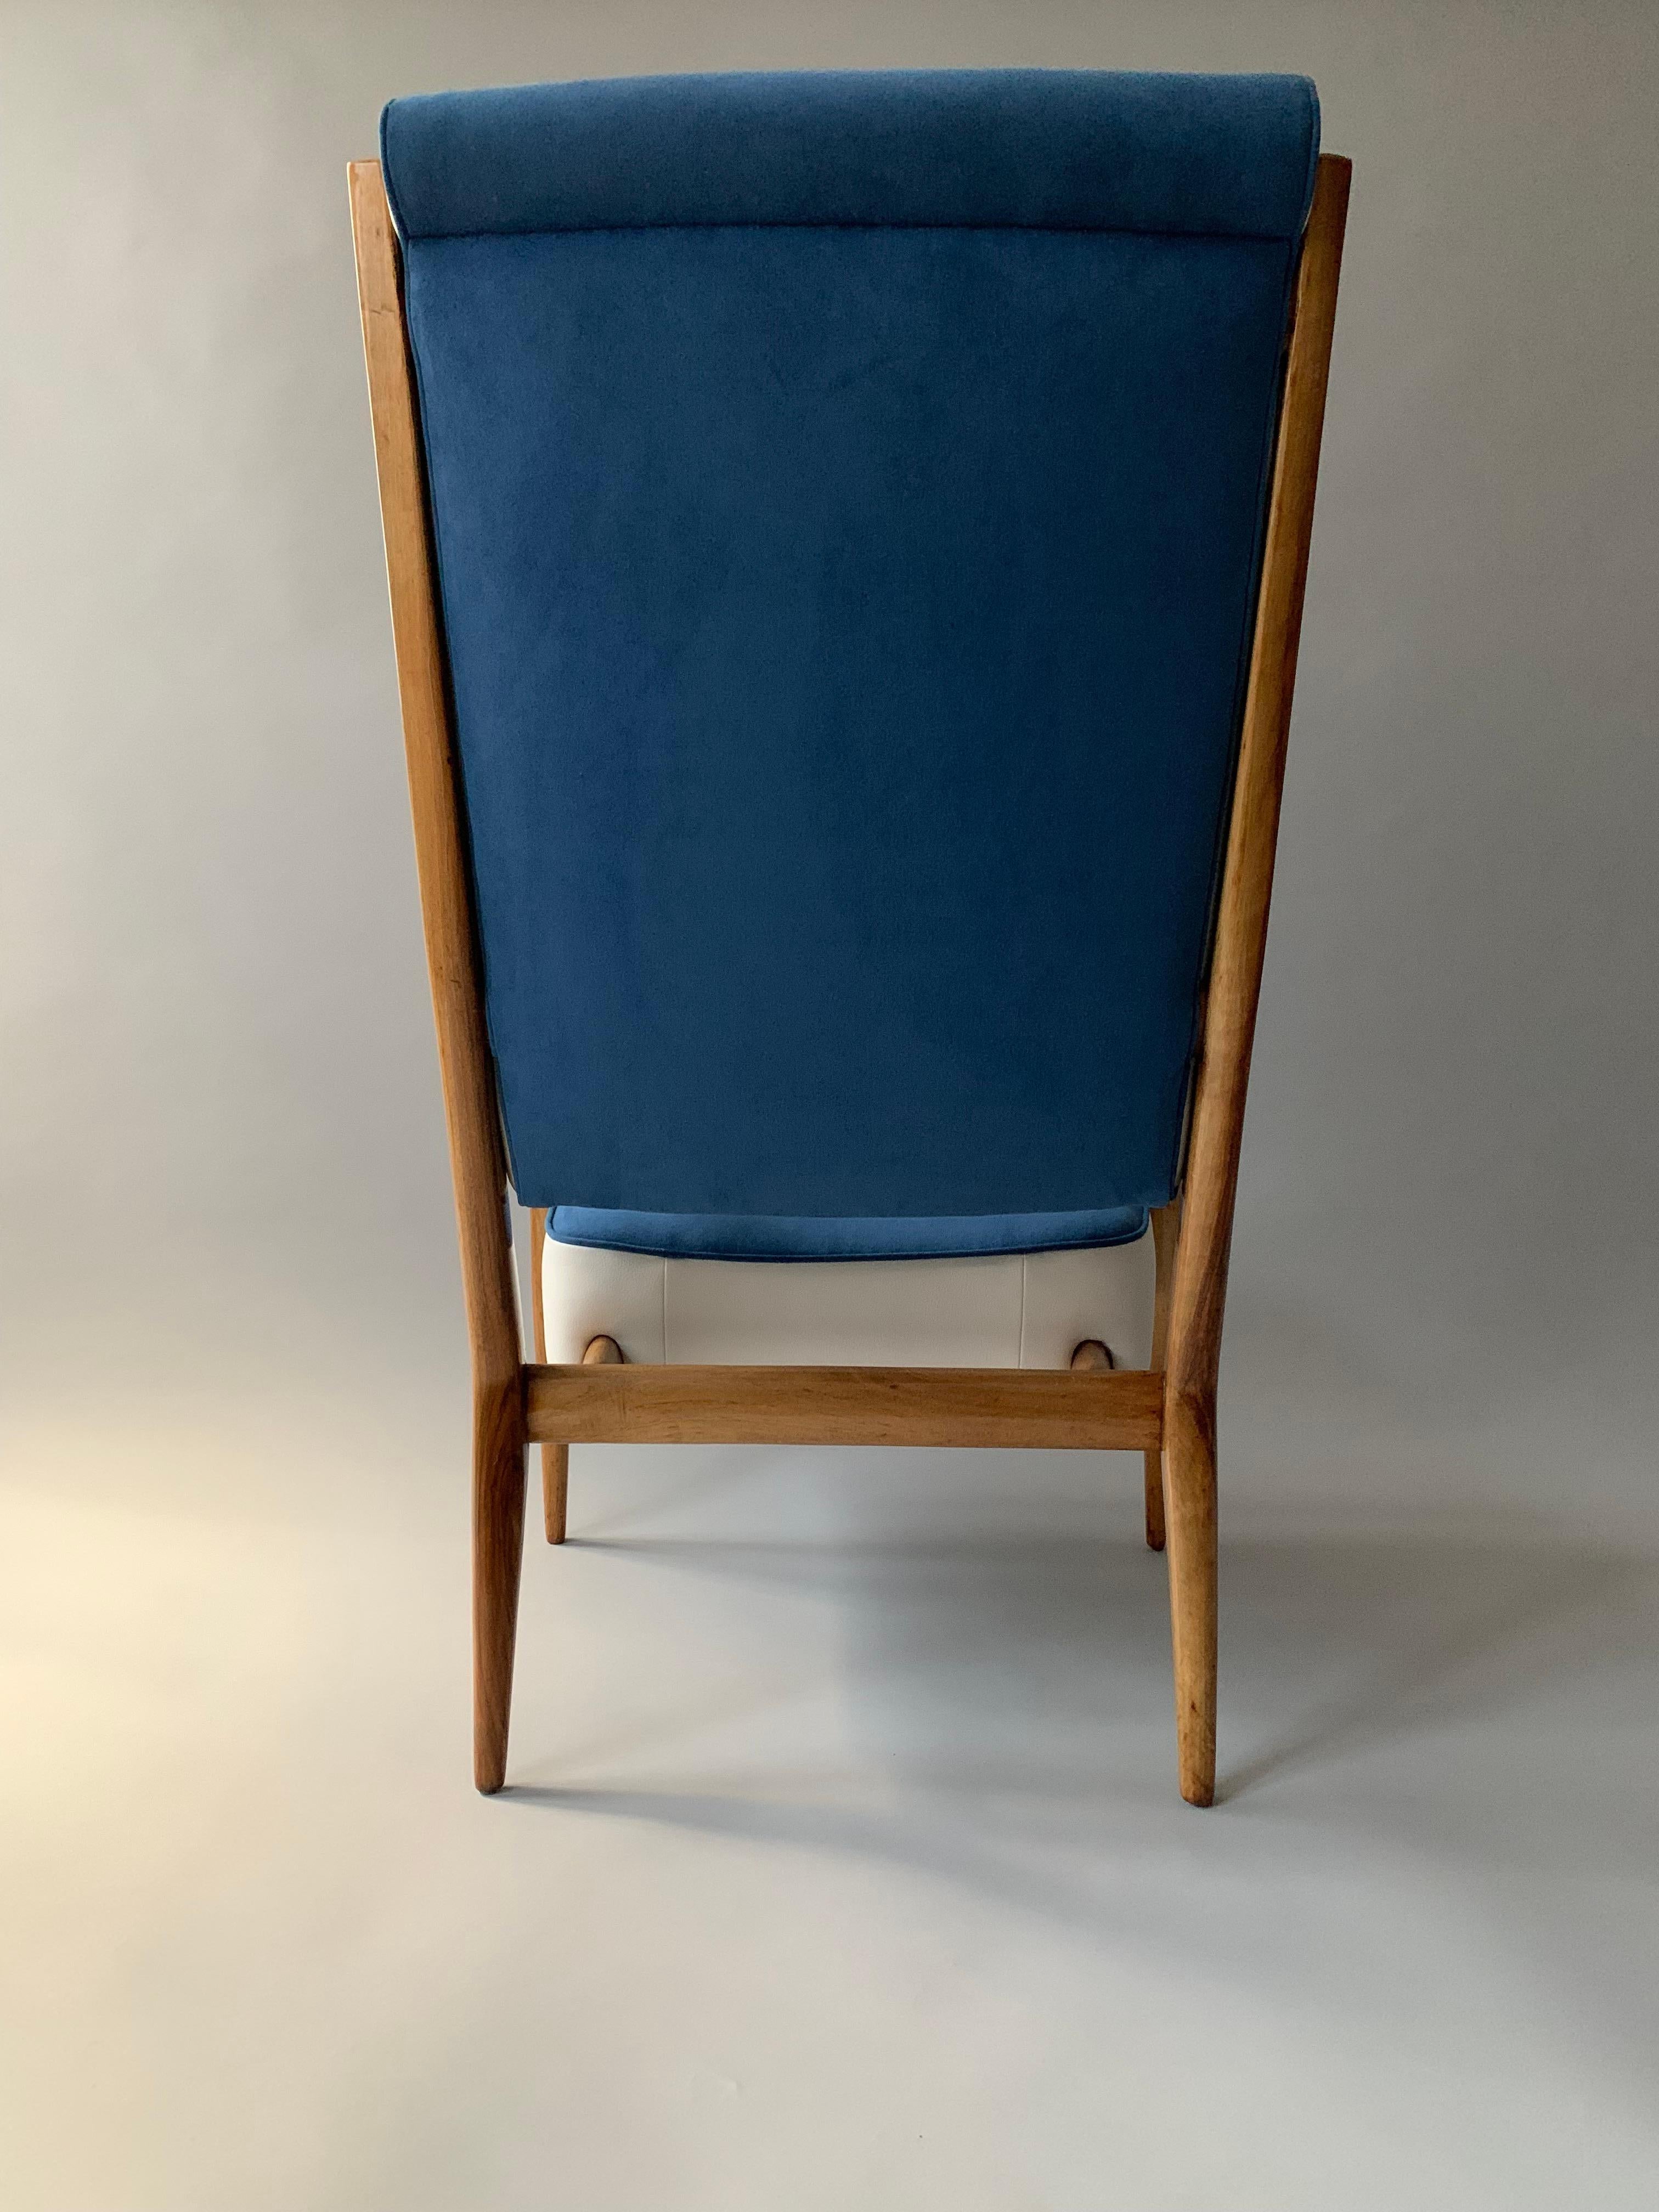 Italian Rare Gio Ponti Amchair Manufactured by Cassina Model # 589, Made in 1955